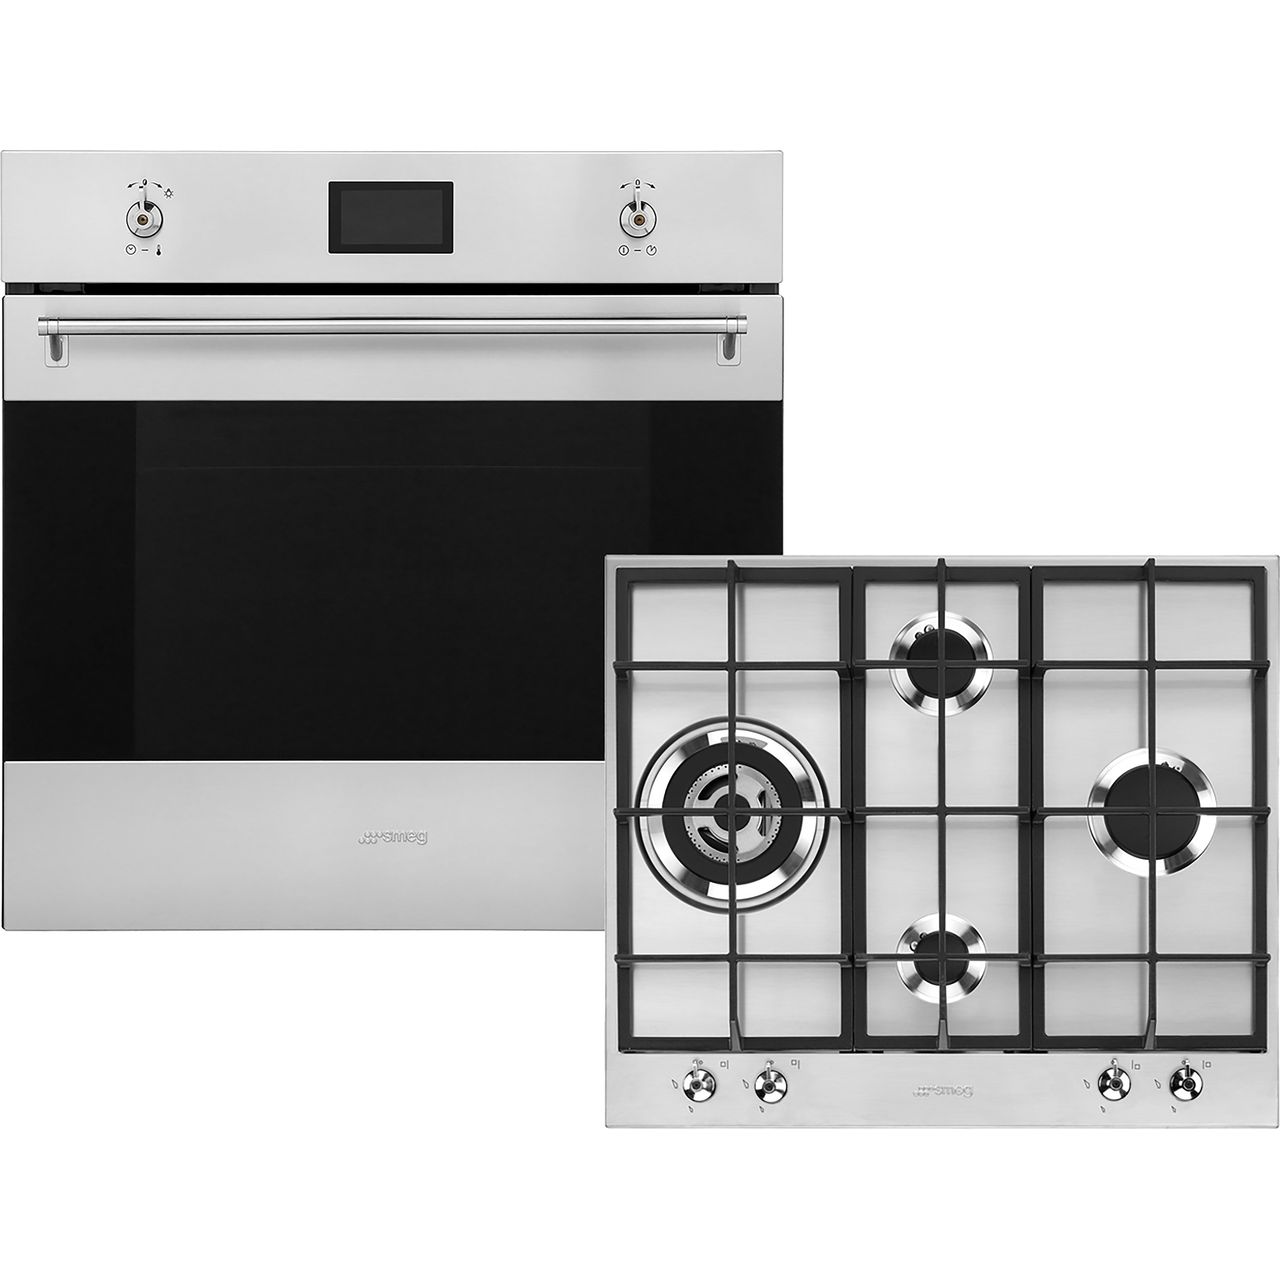 Smeg Classic AOSF6390G2 Built In Electric Single Oven and Gas Hob Pack Review